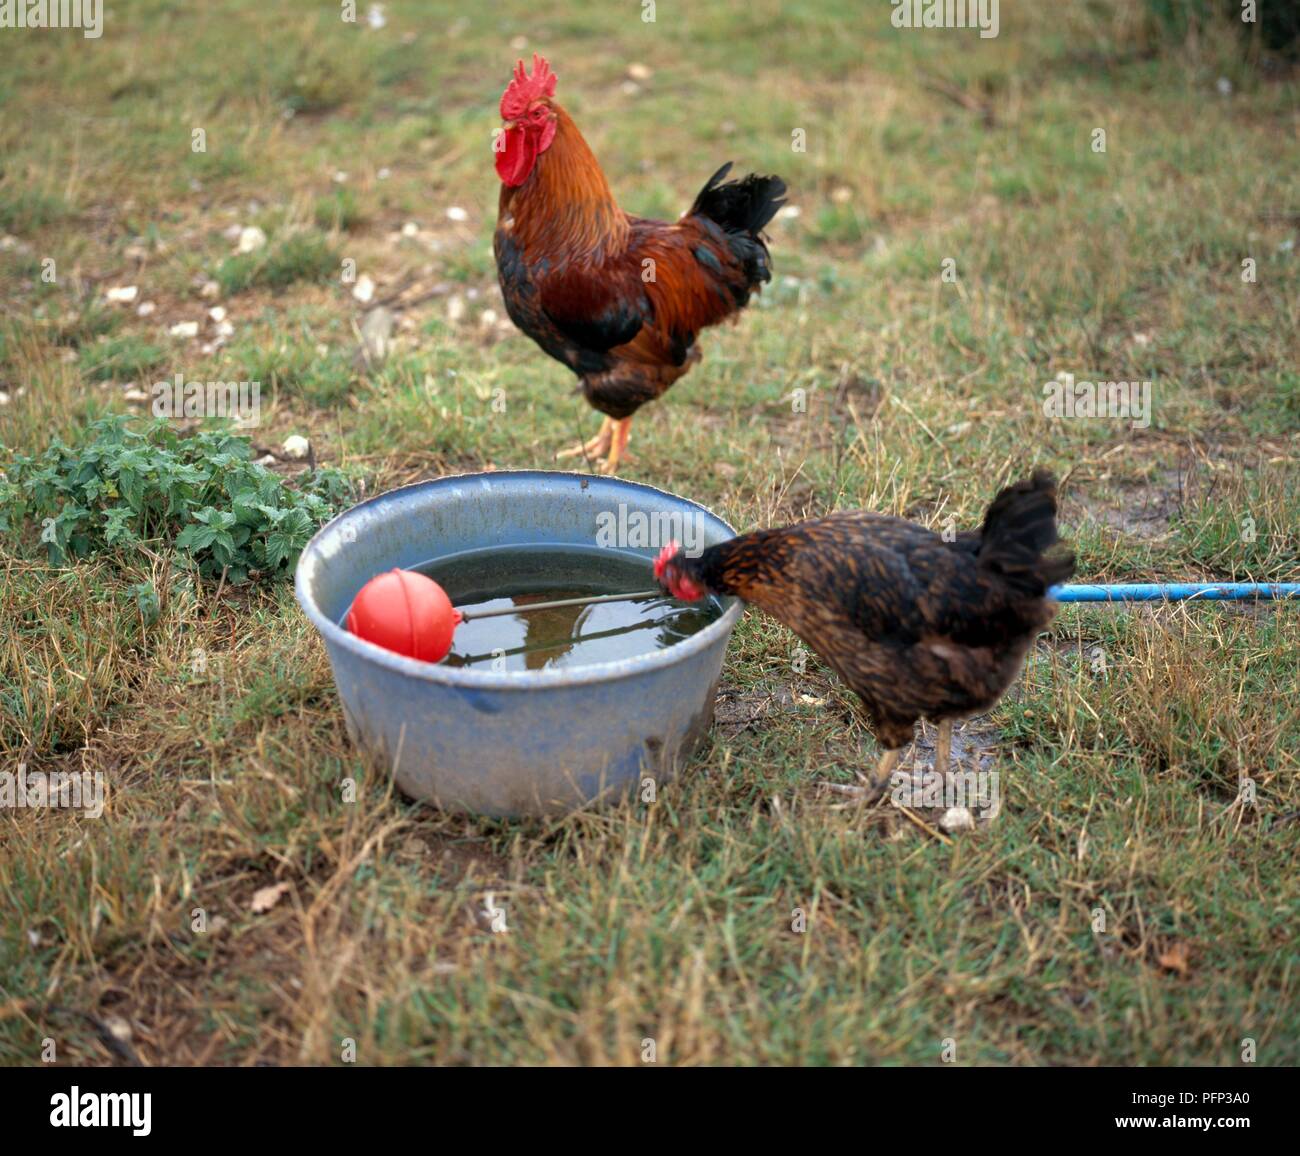 Chicken drinking water from bowl with cockerel standing on grass in backround Stock Photo